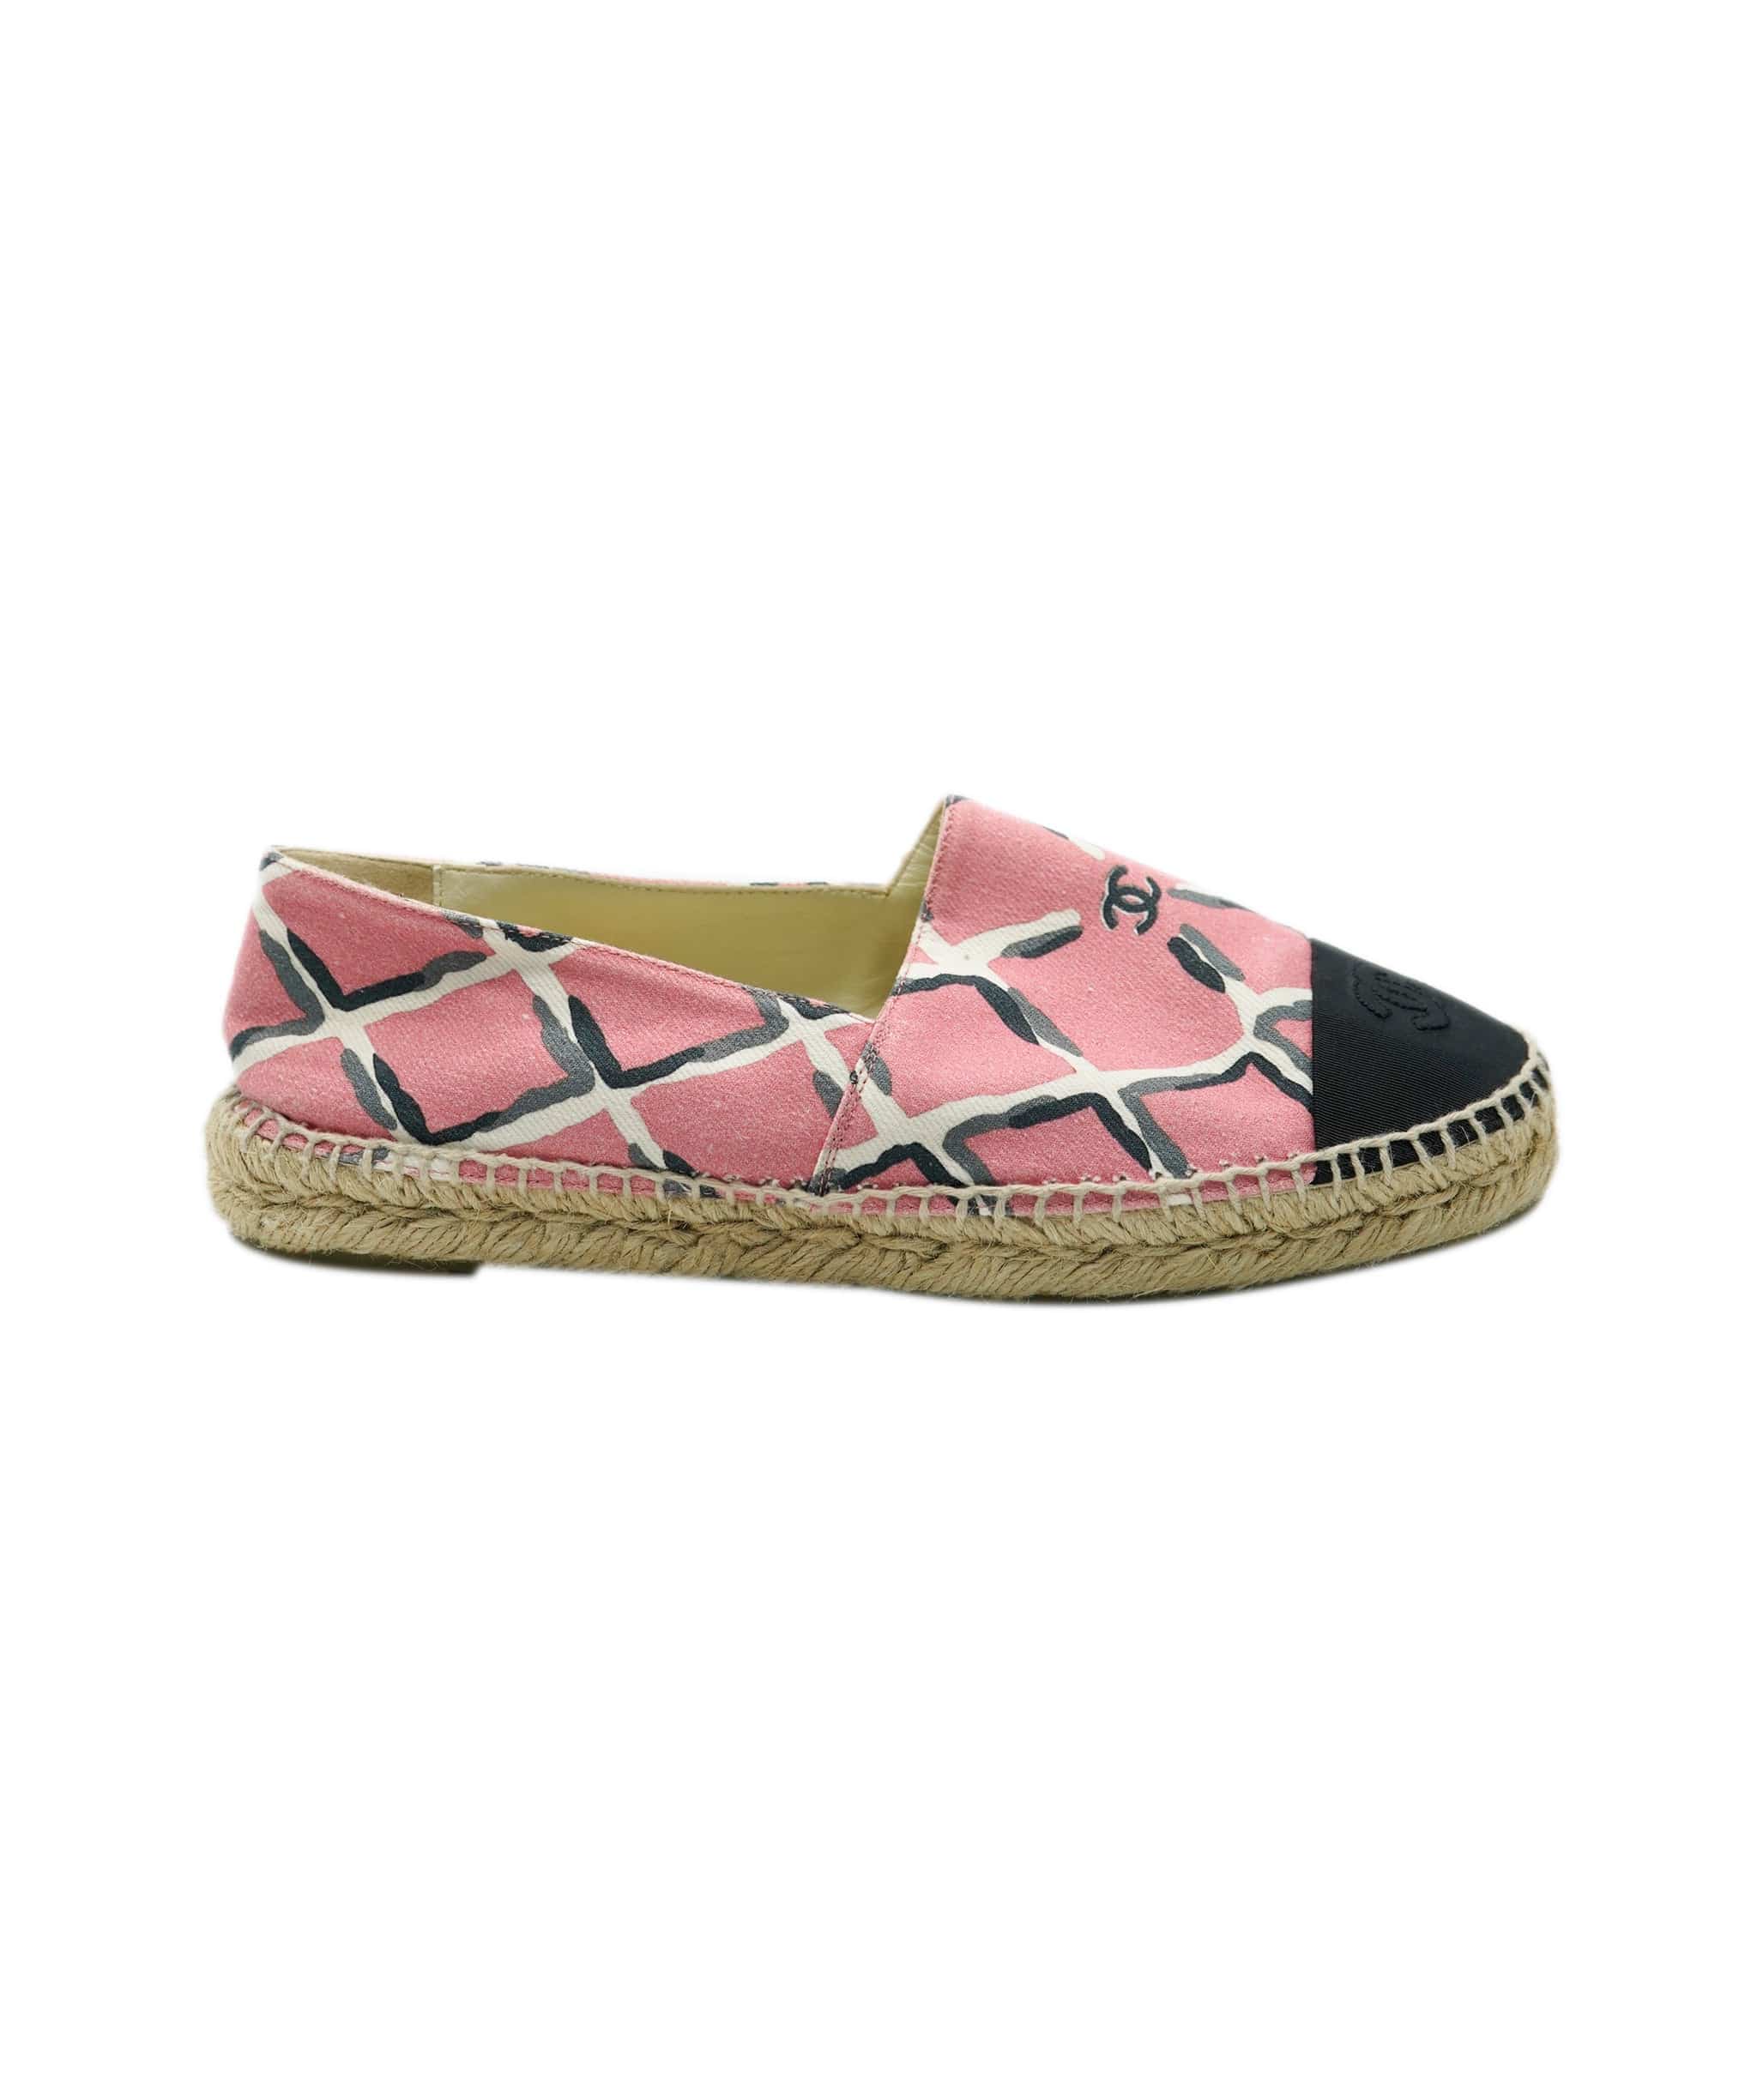 Chanel Chanel espadrilles pink 38 AVC1982